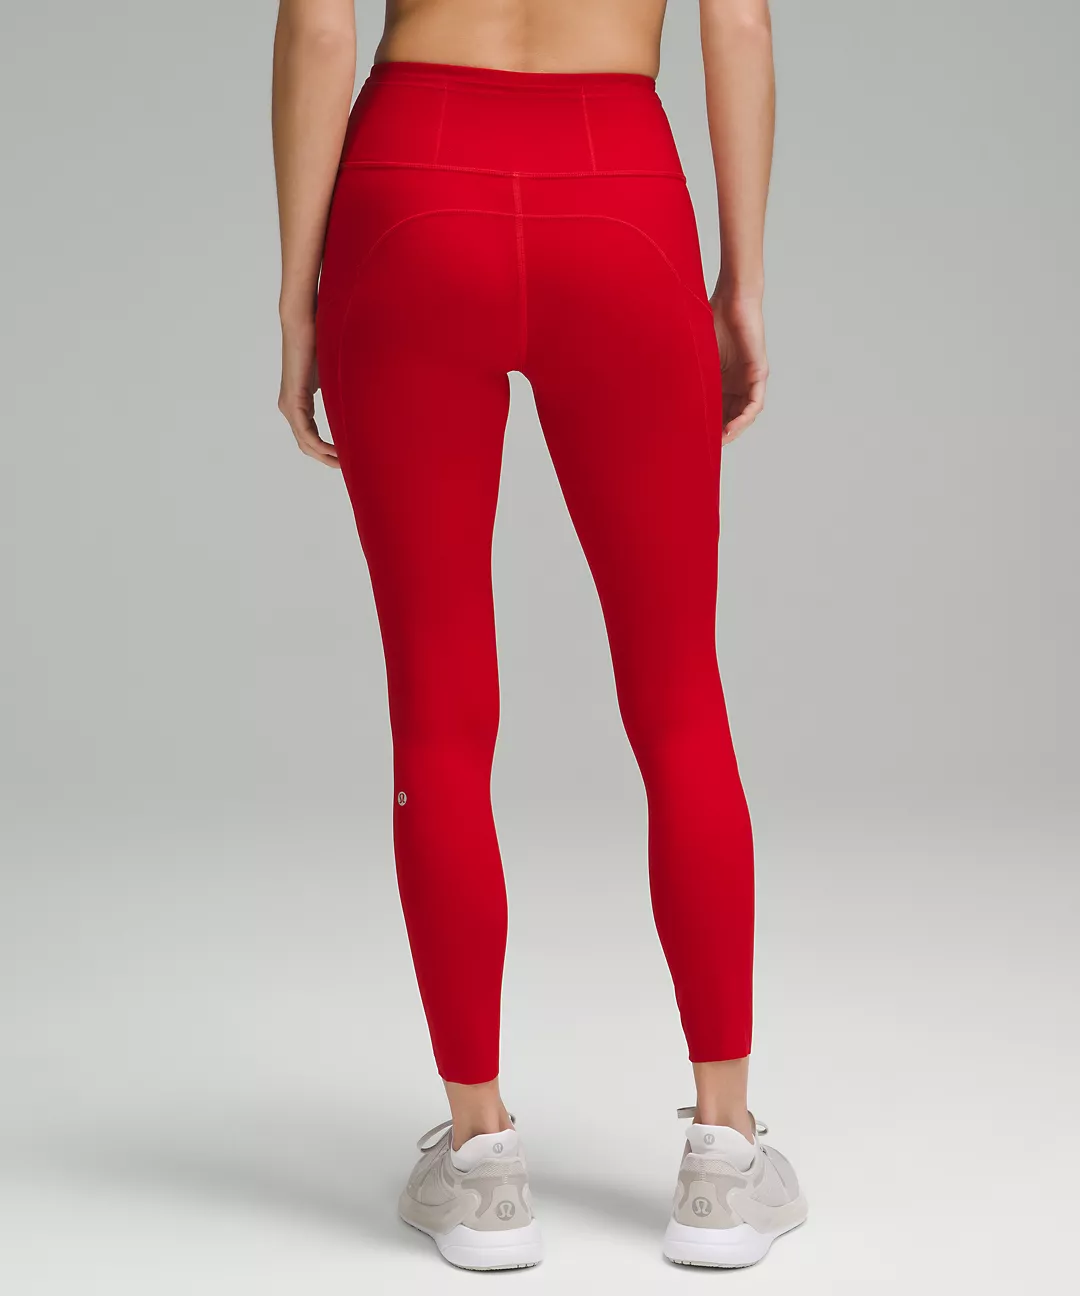 Top 7 Best lululemon Leggings of All Time, Reviewed [Edited in March ...